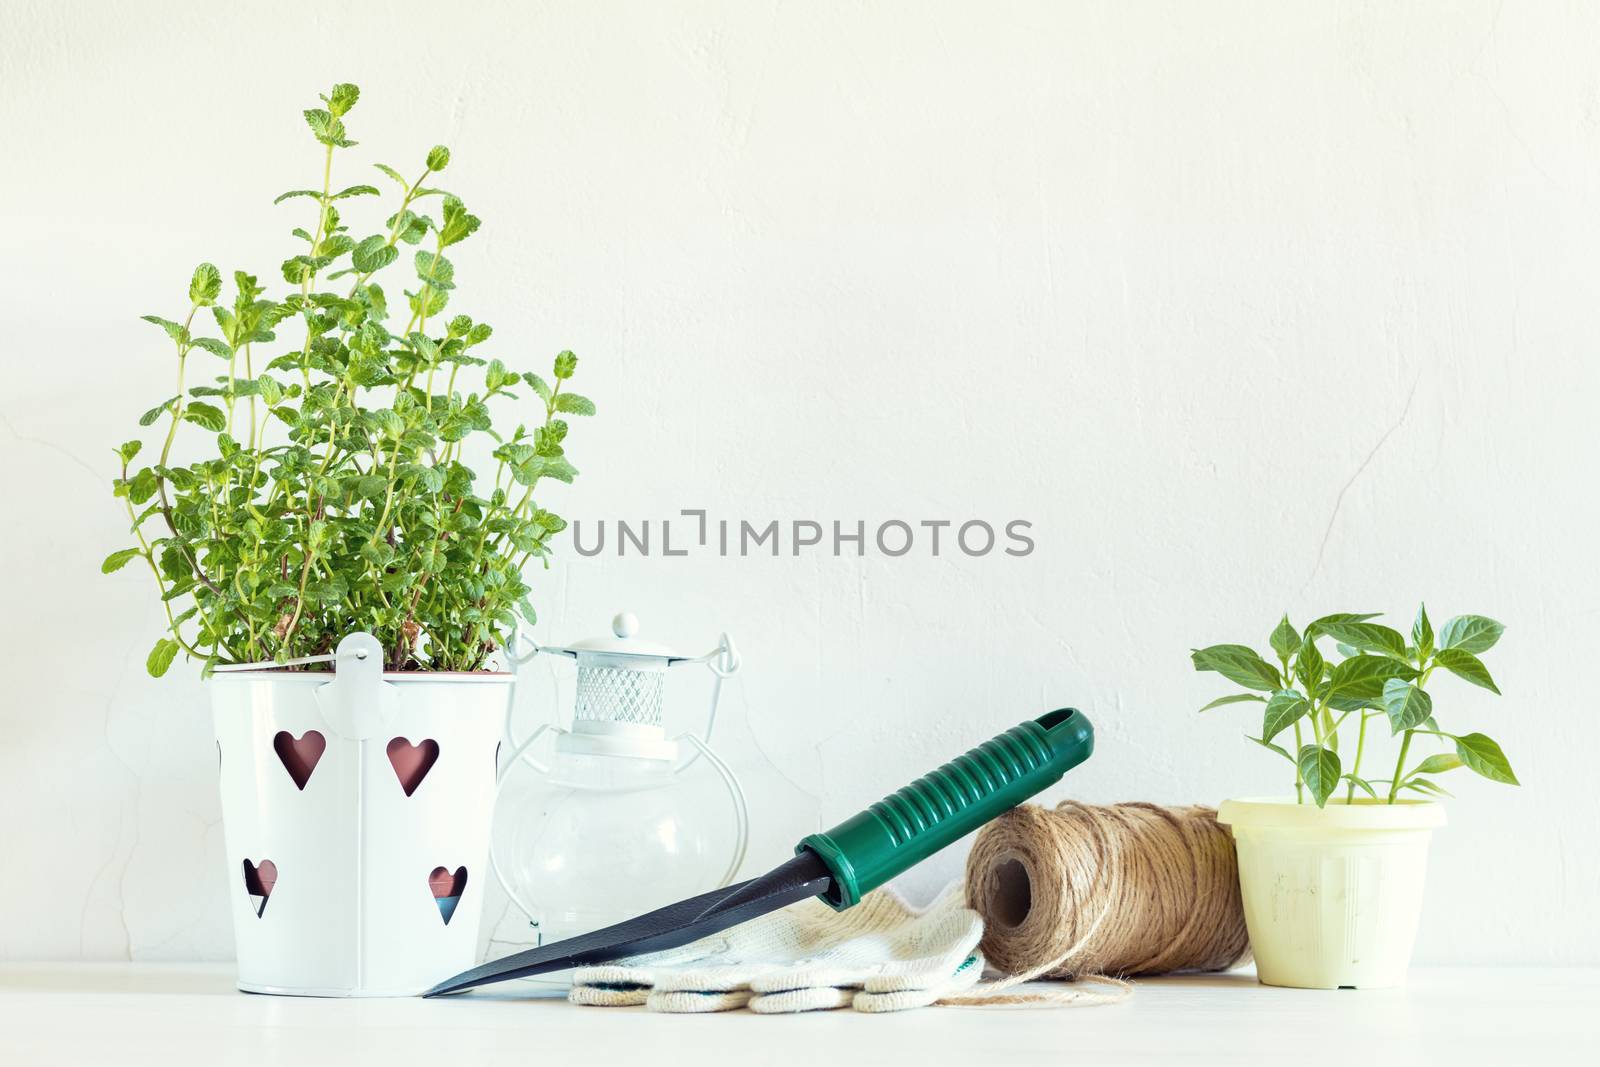 Spring gardening light concept. Fresh mint, pepper seedling in pots, hank of rope and gardening tools on a white table. White wall background.